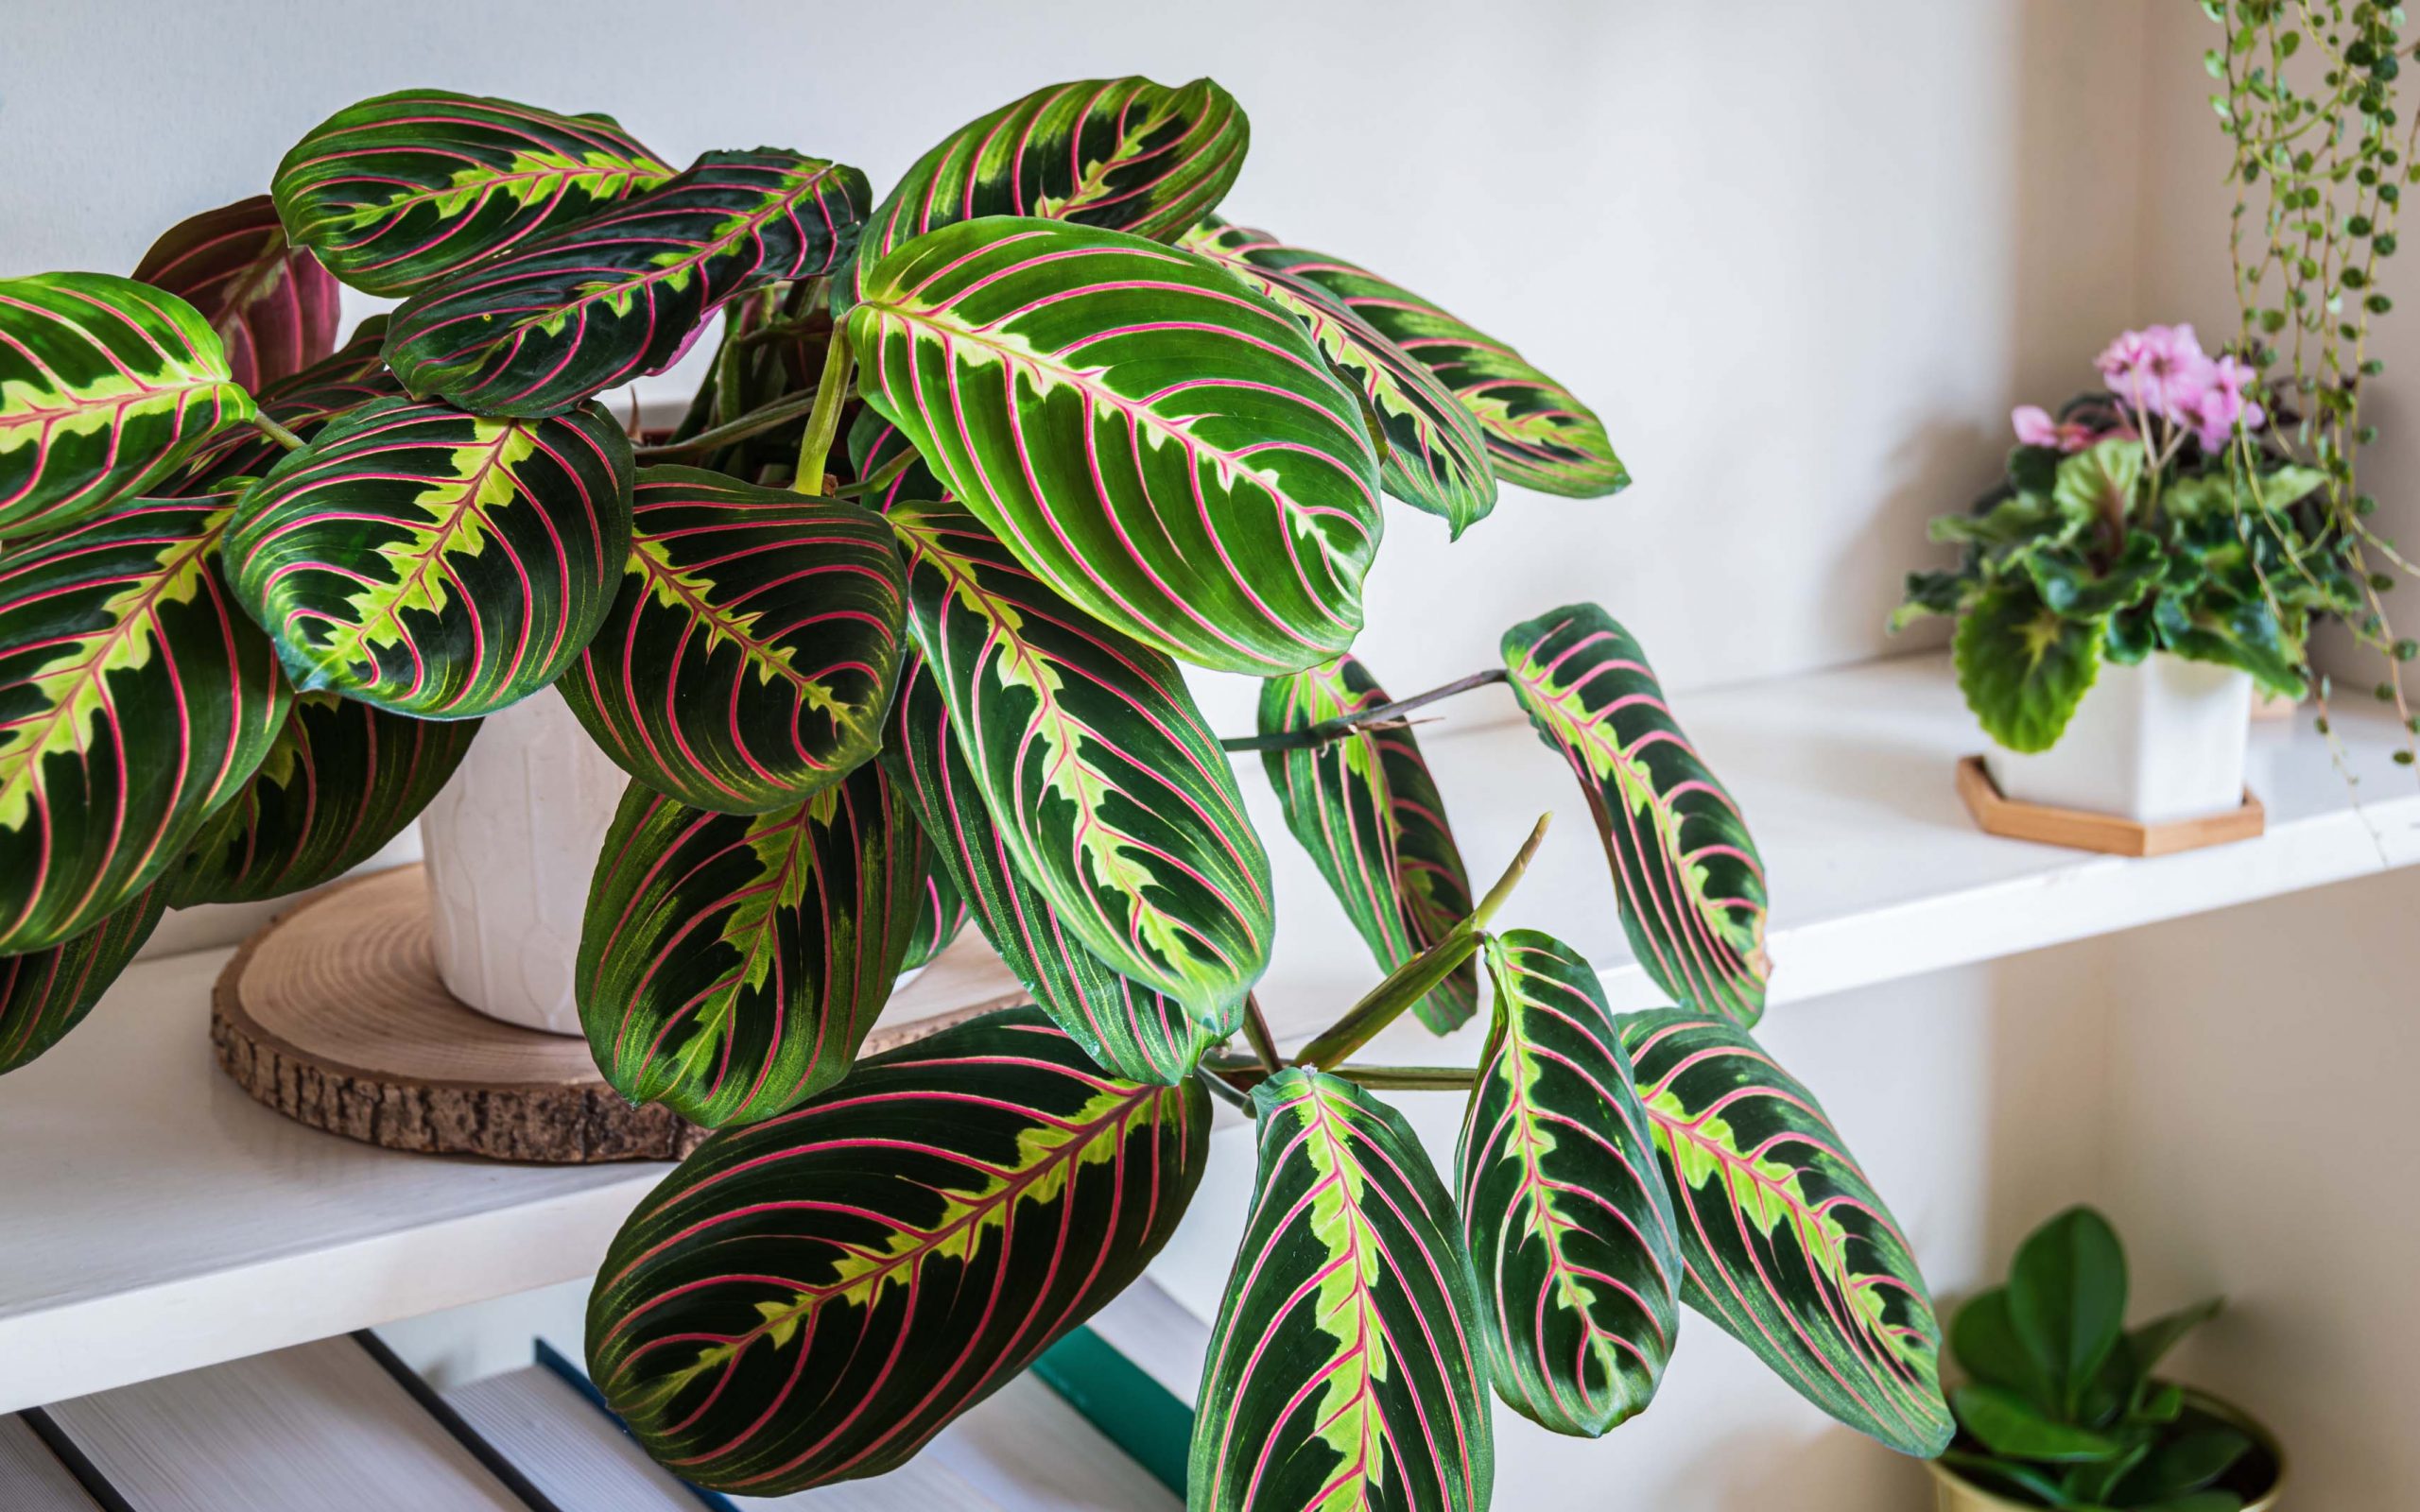 Prayer Plants Buying & Growing Guide